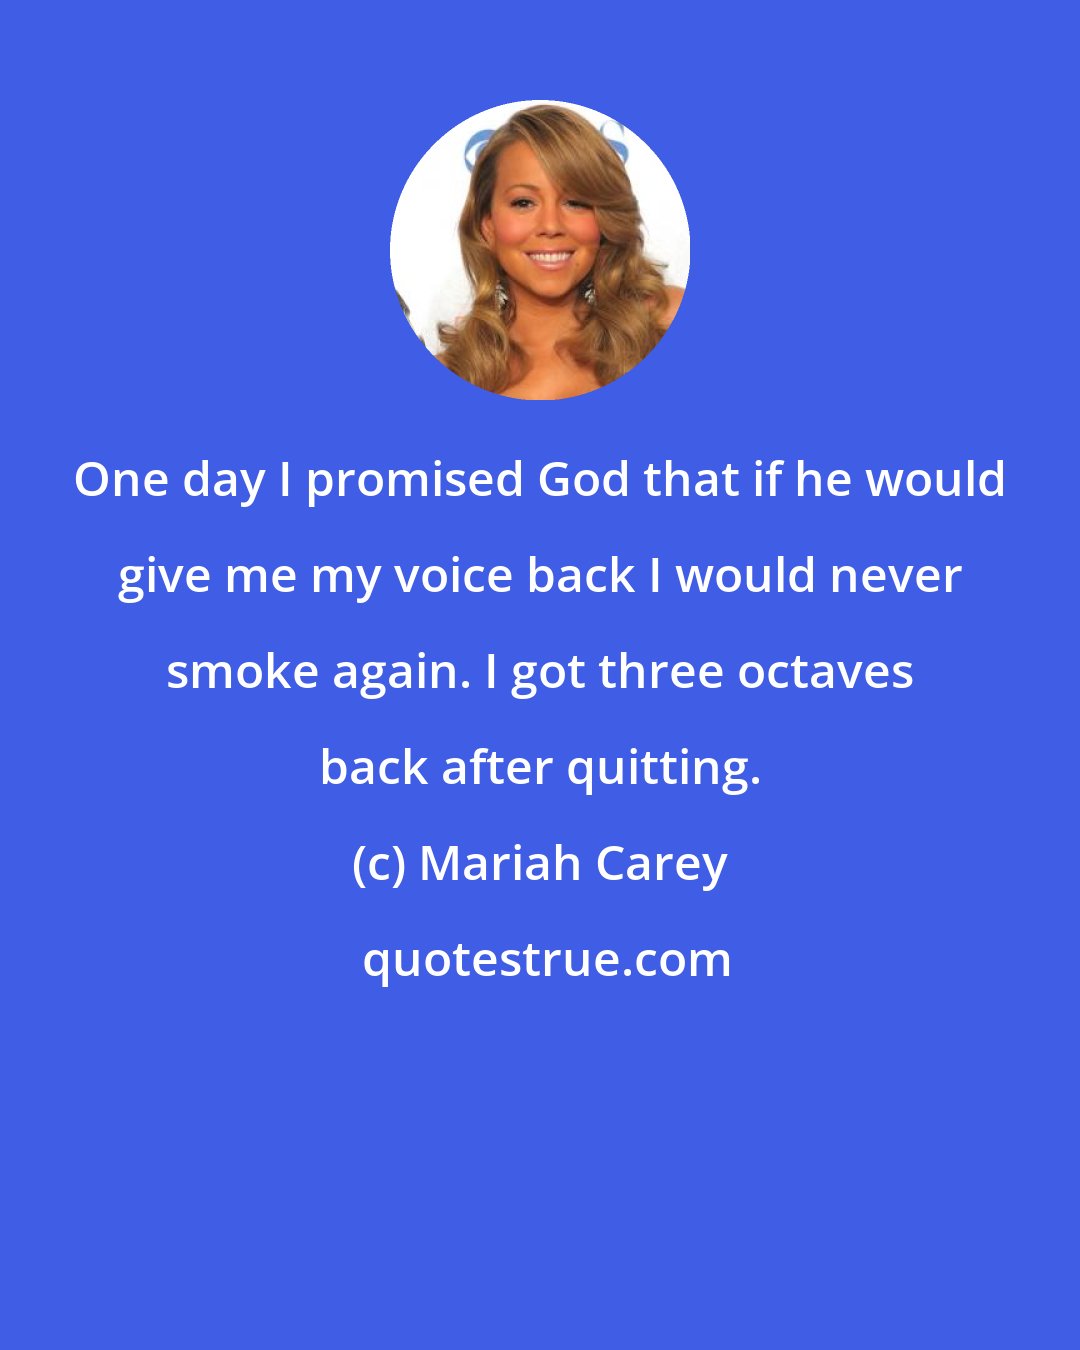 Mariah Carey: One day I promised God that if he would give me my voice back I would never smoke again. I got three octaves back after quitting.